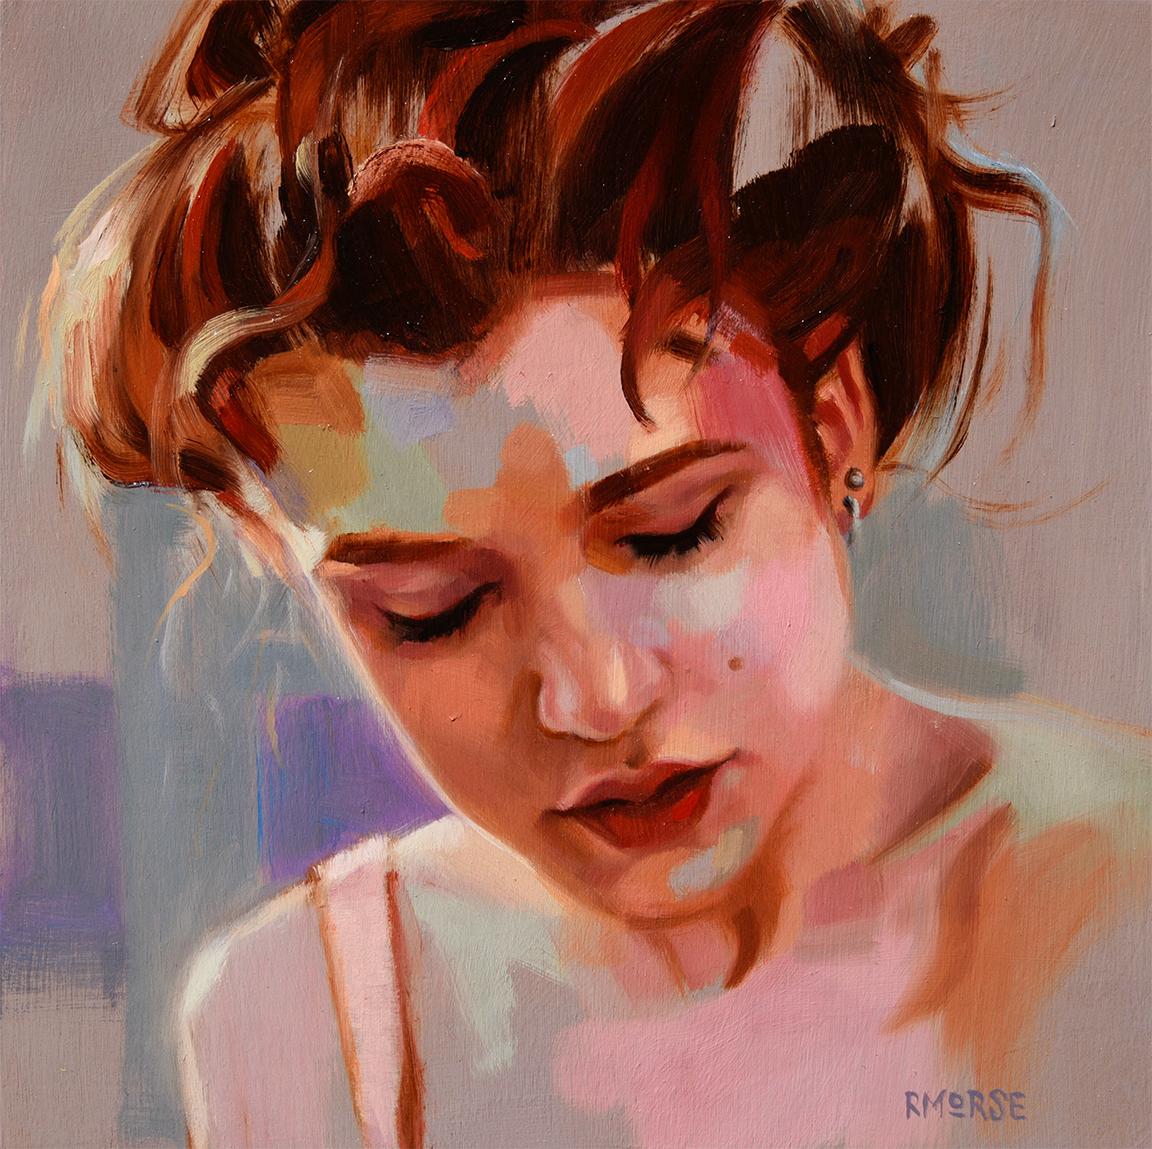 Ryan Morse Portrait Painting – Evellyn: „Coverlyn“ 